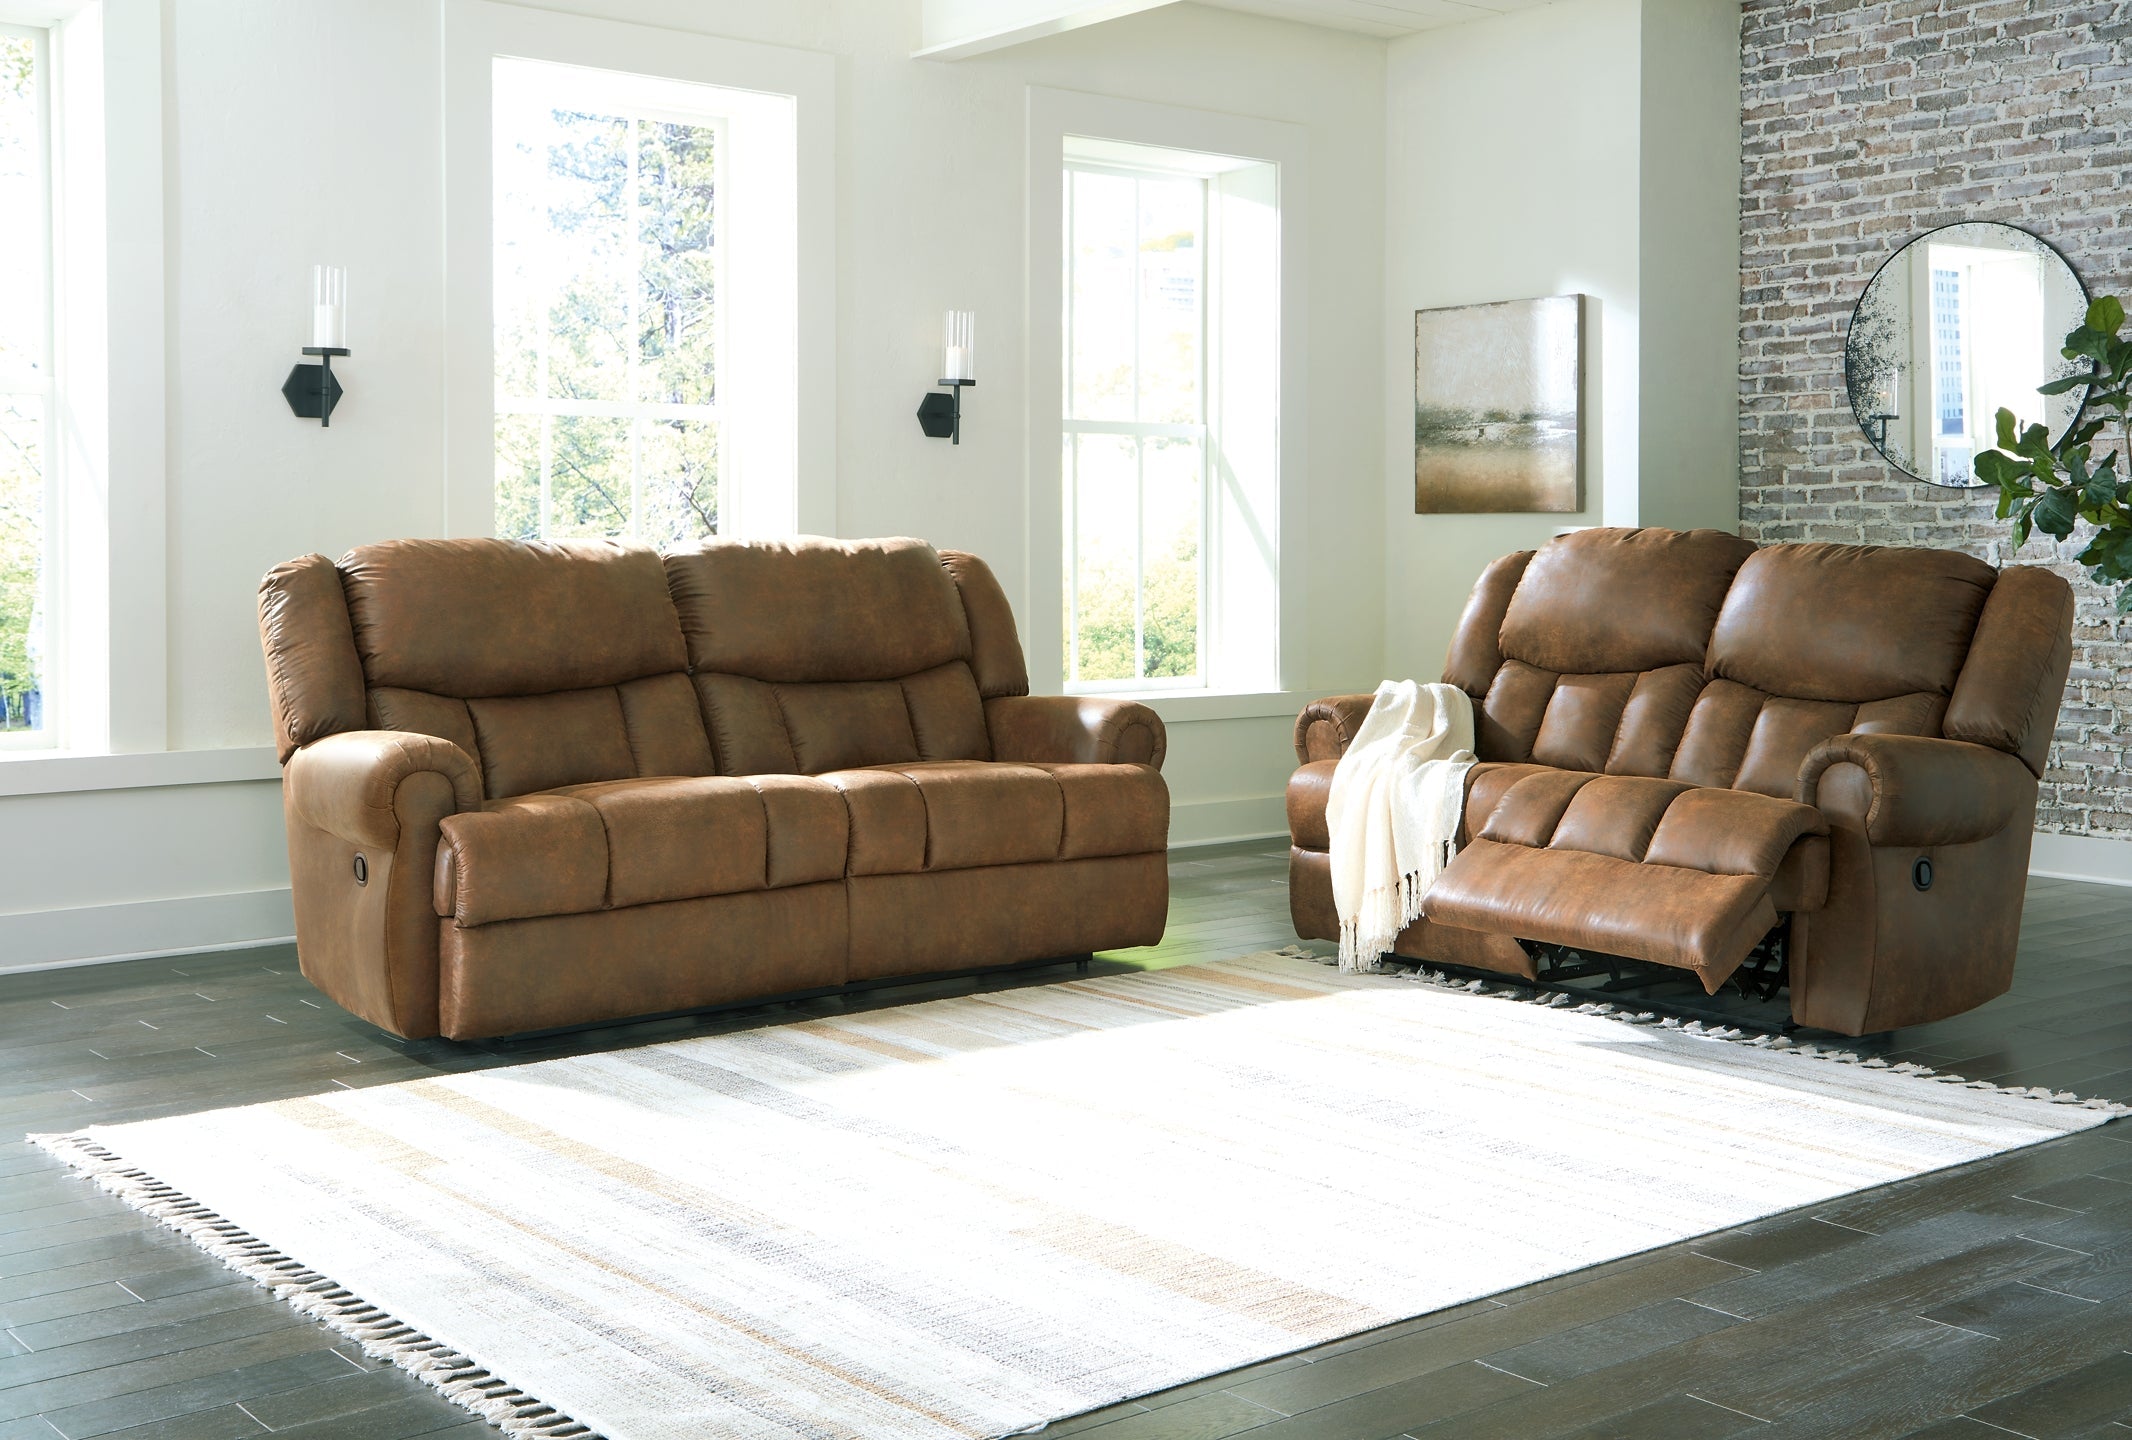 Boothbay Manual Reclining Sofa and Loveseat